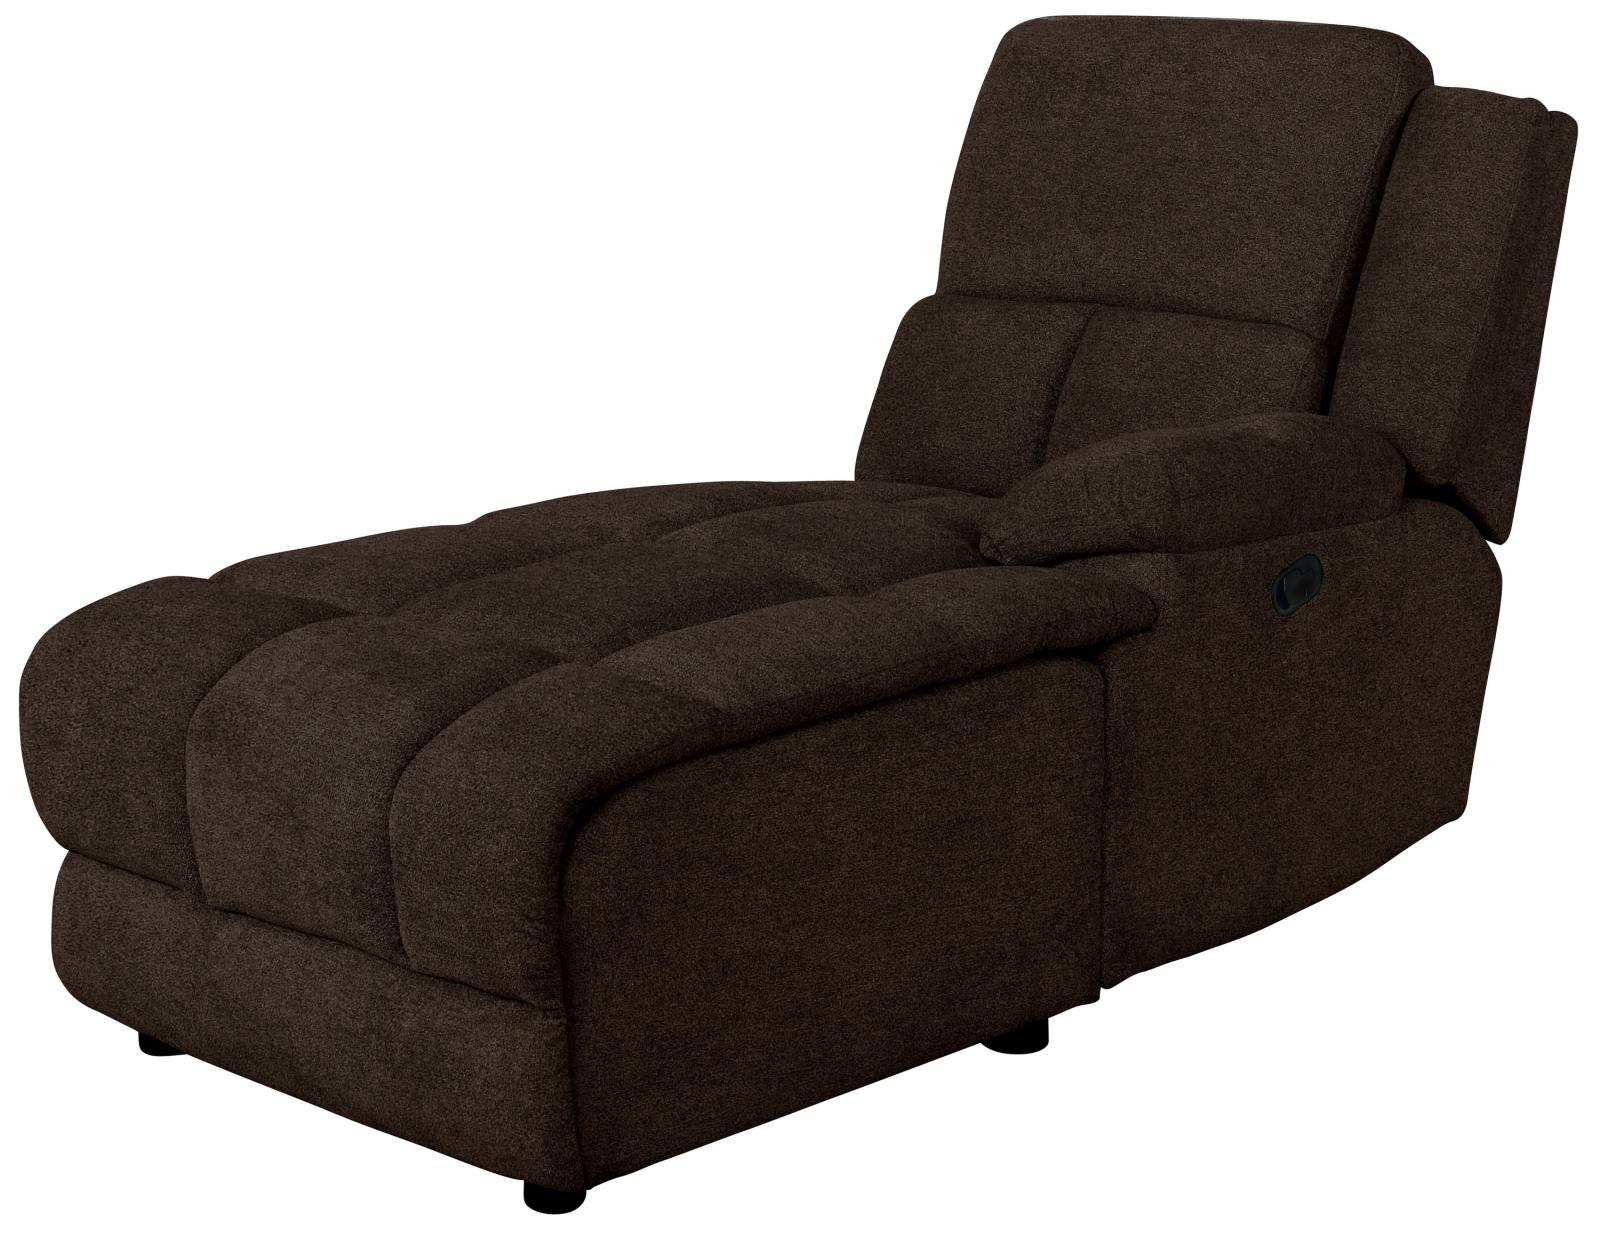 Belize 6-piece Pillow Top Arm Motion Sectional Brown - What A Room